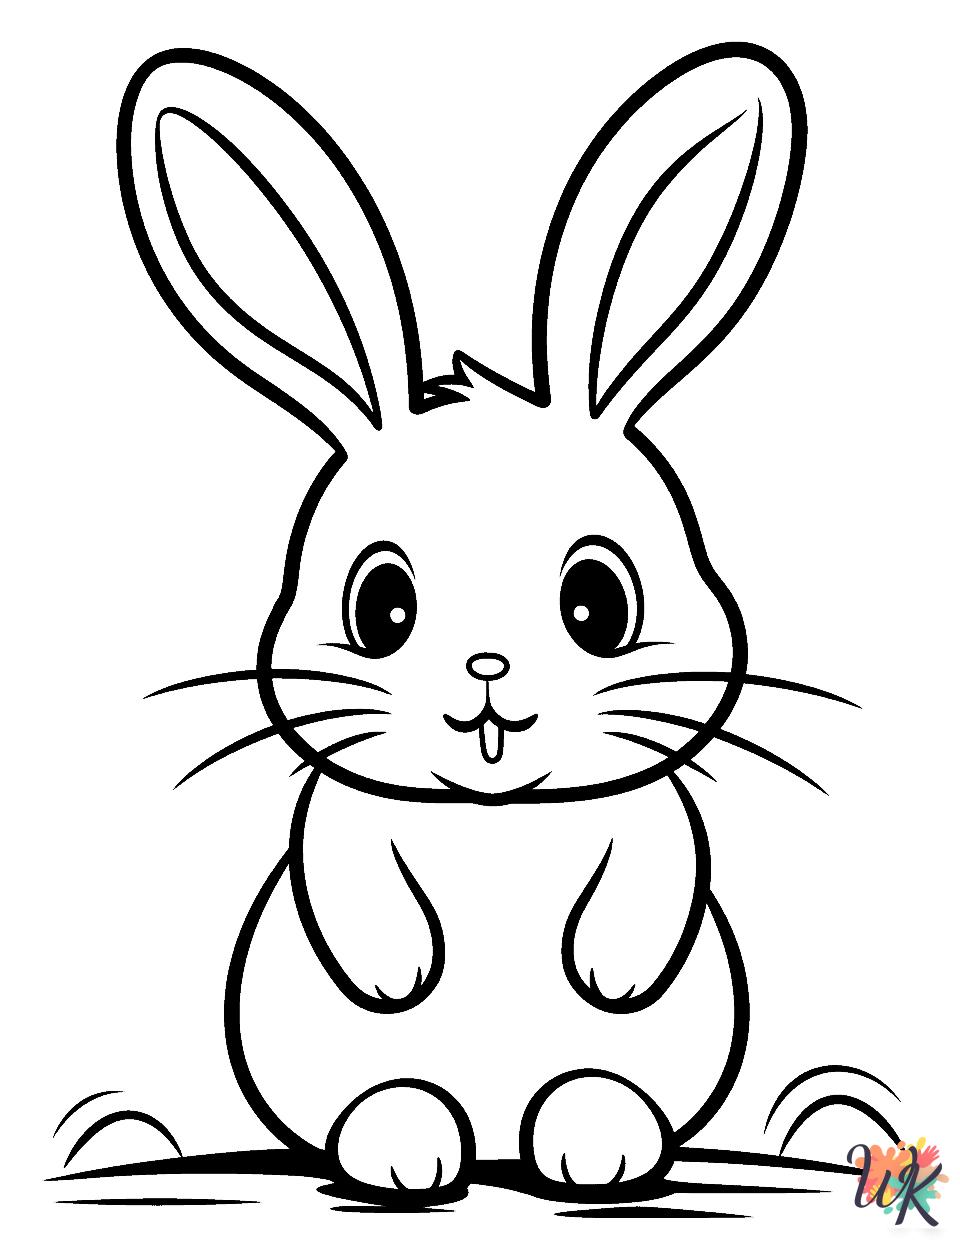 Rabbits free coloring pages